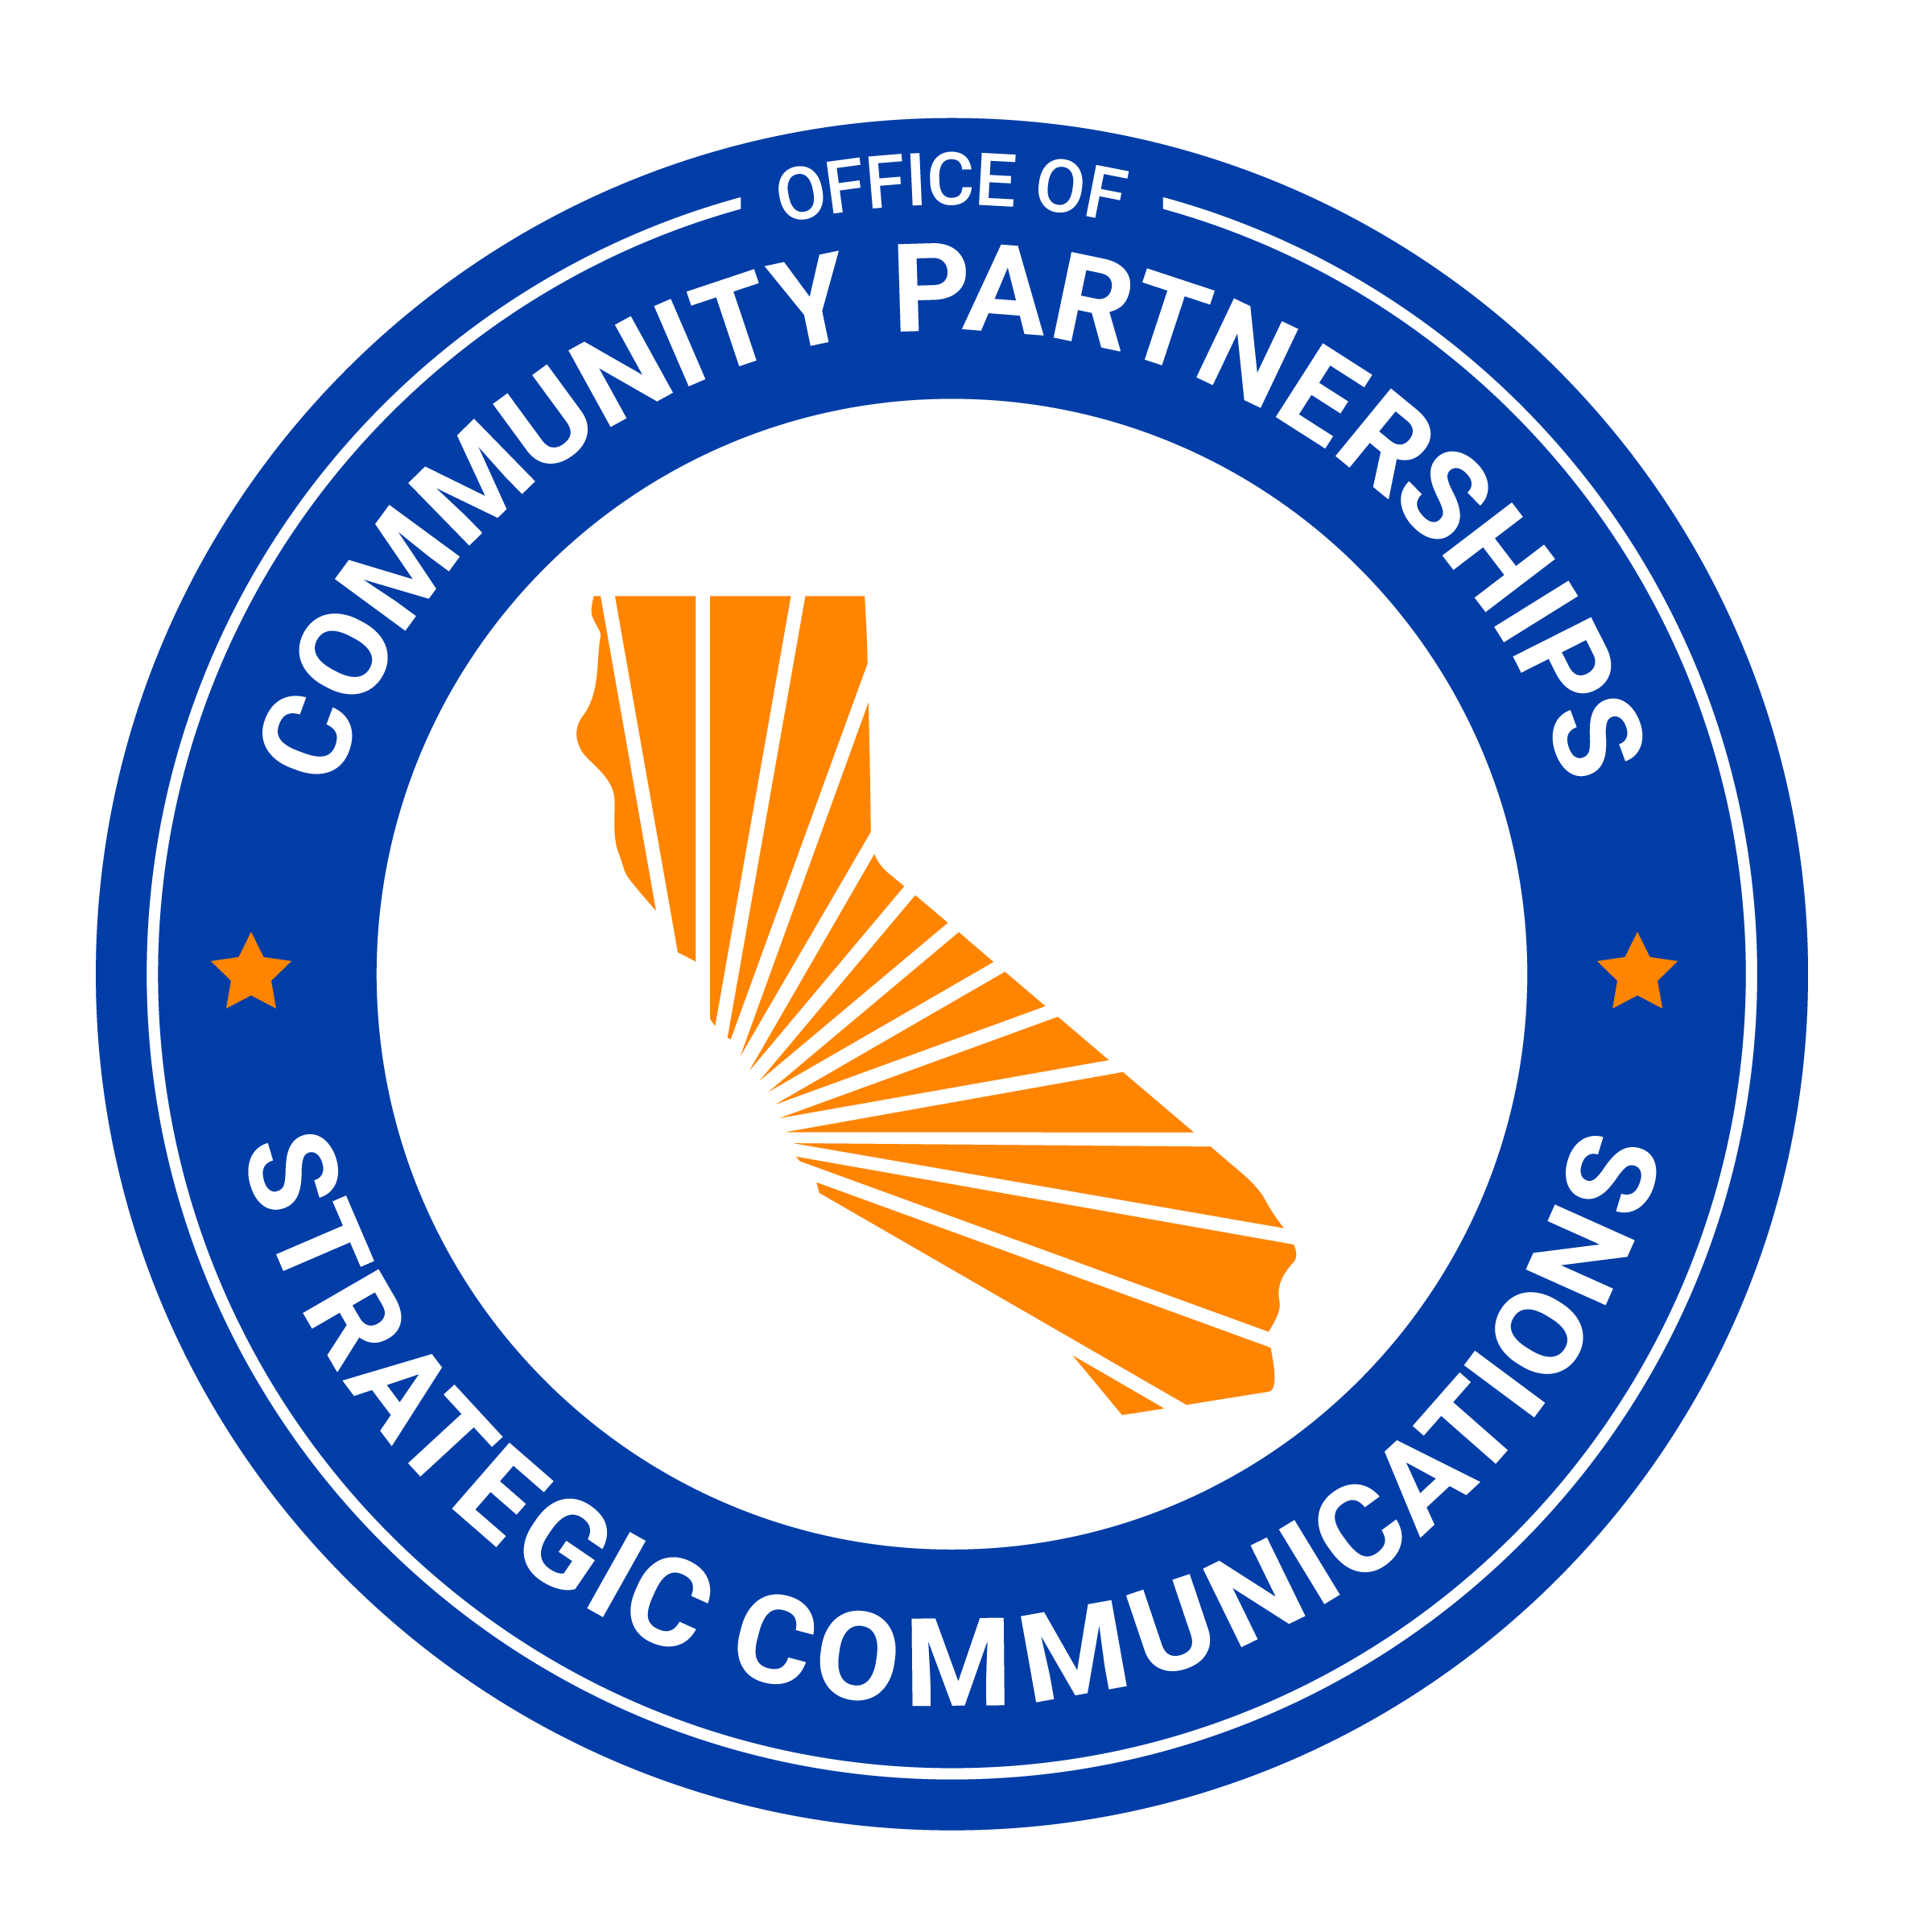 logo for the Office of Community Partnerships and Strategic Communications